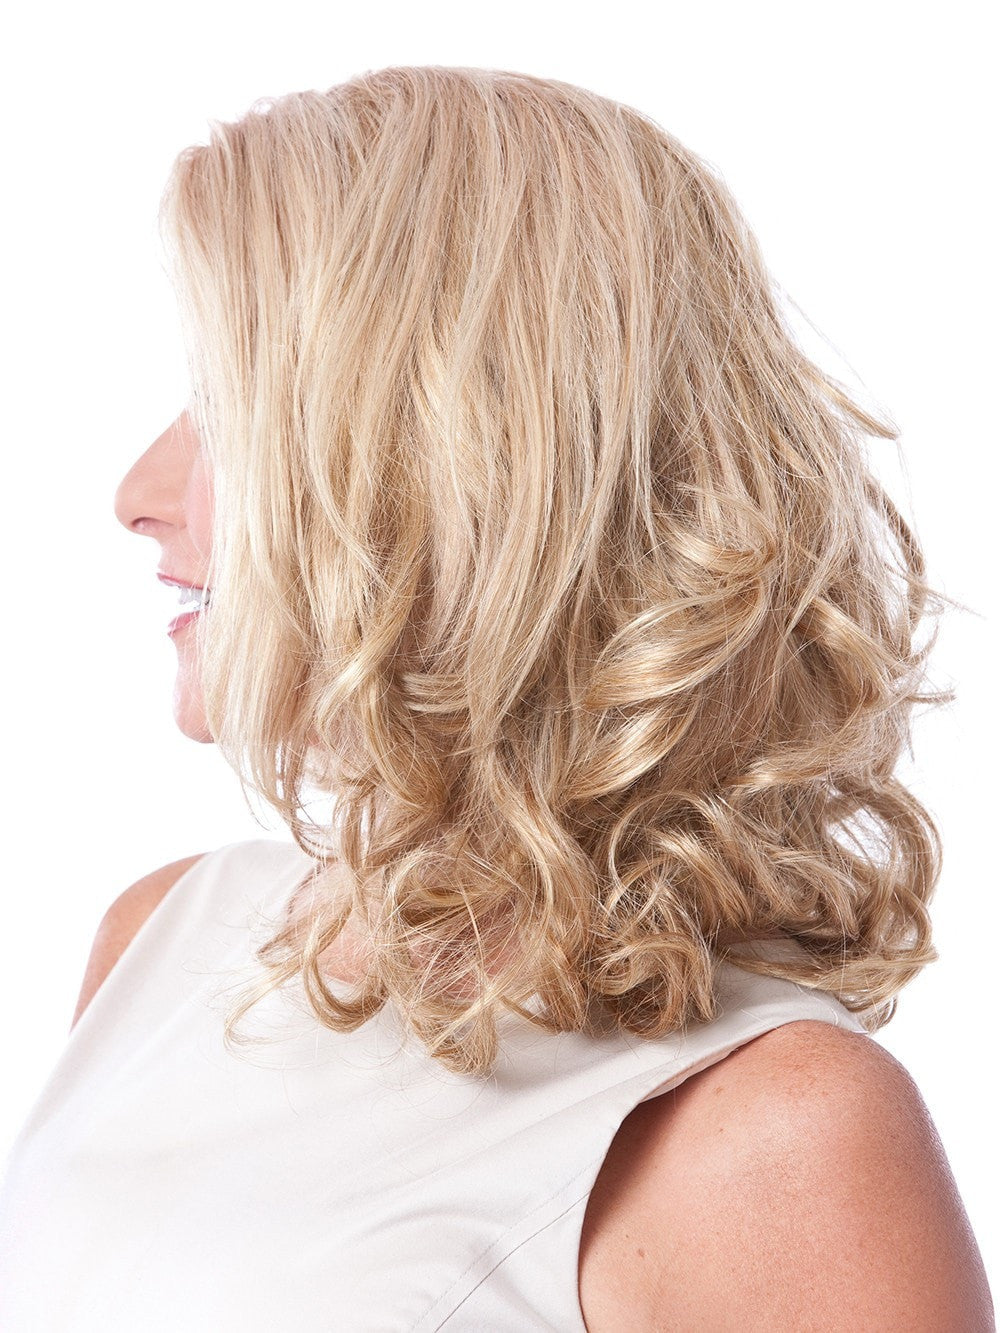 Clip-in curly hair extension with 3 layers of hair that gives you fabulous, fuller hair in an instant